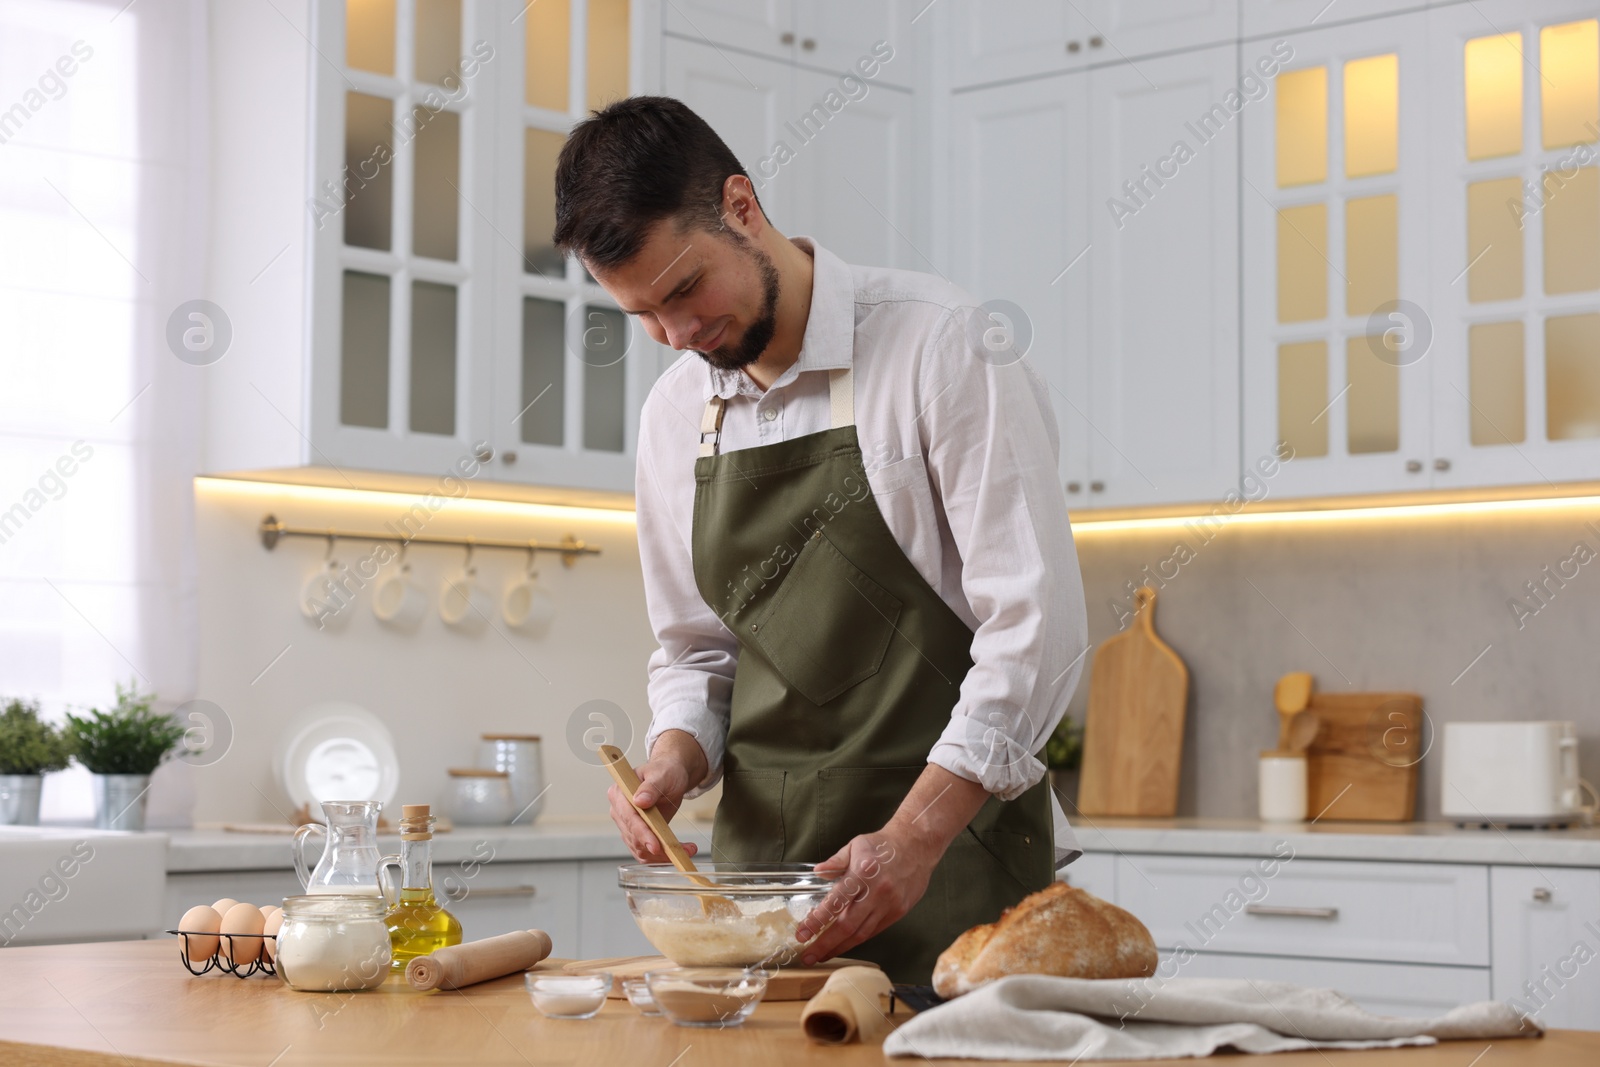 Photo of Making bread. Man preparing dough in bowl at wooden table in kitchen